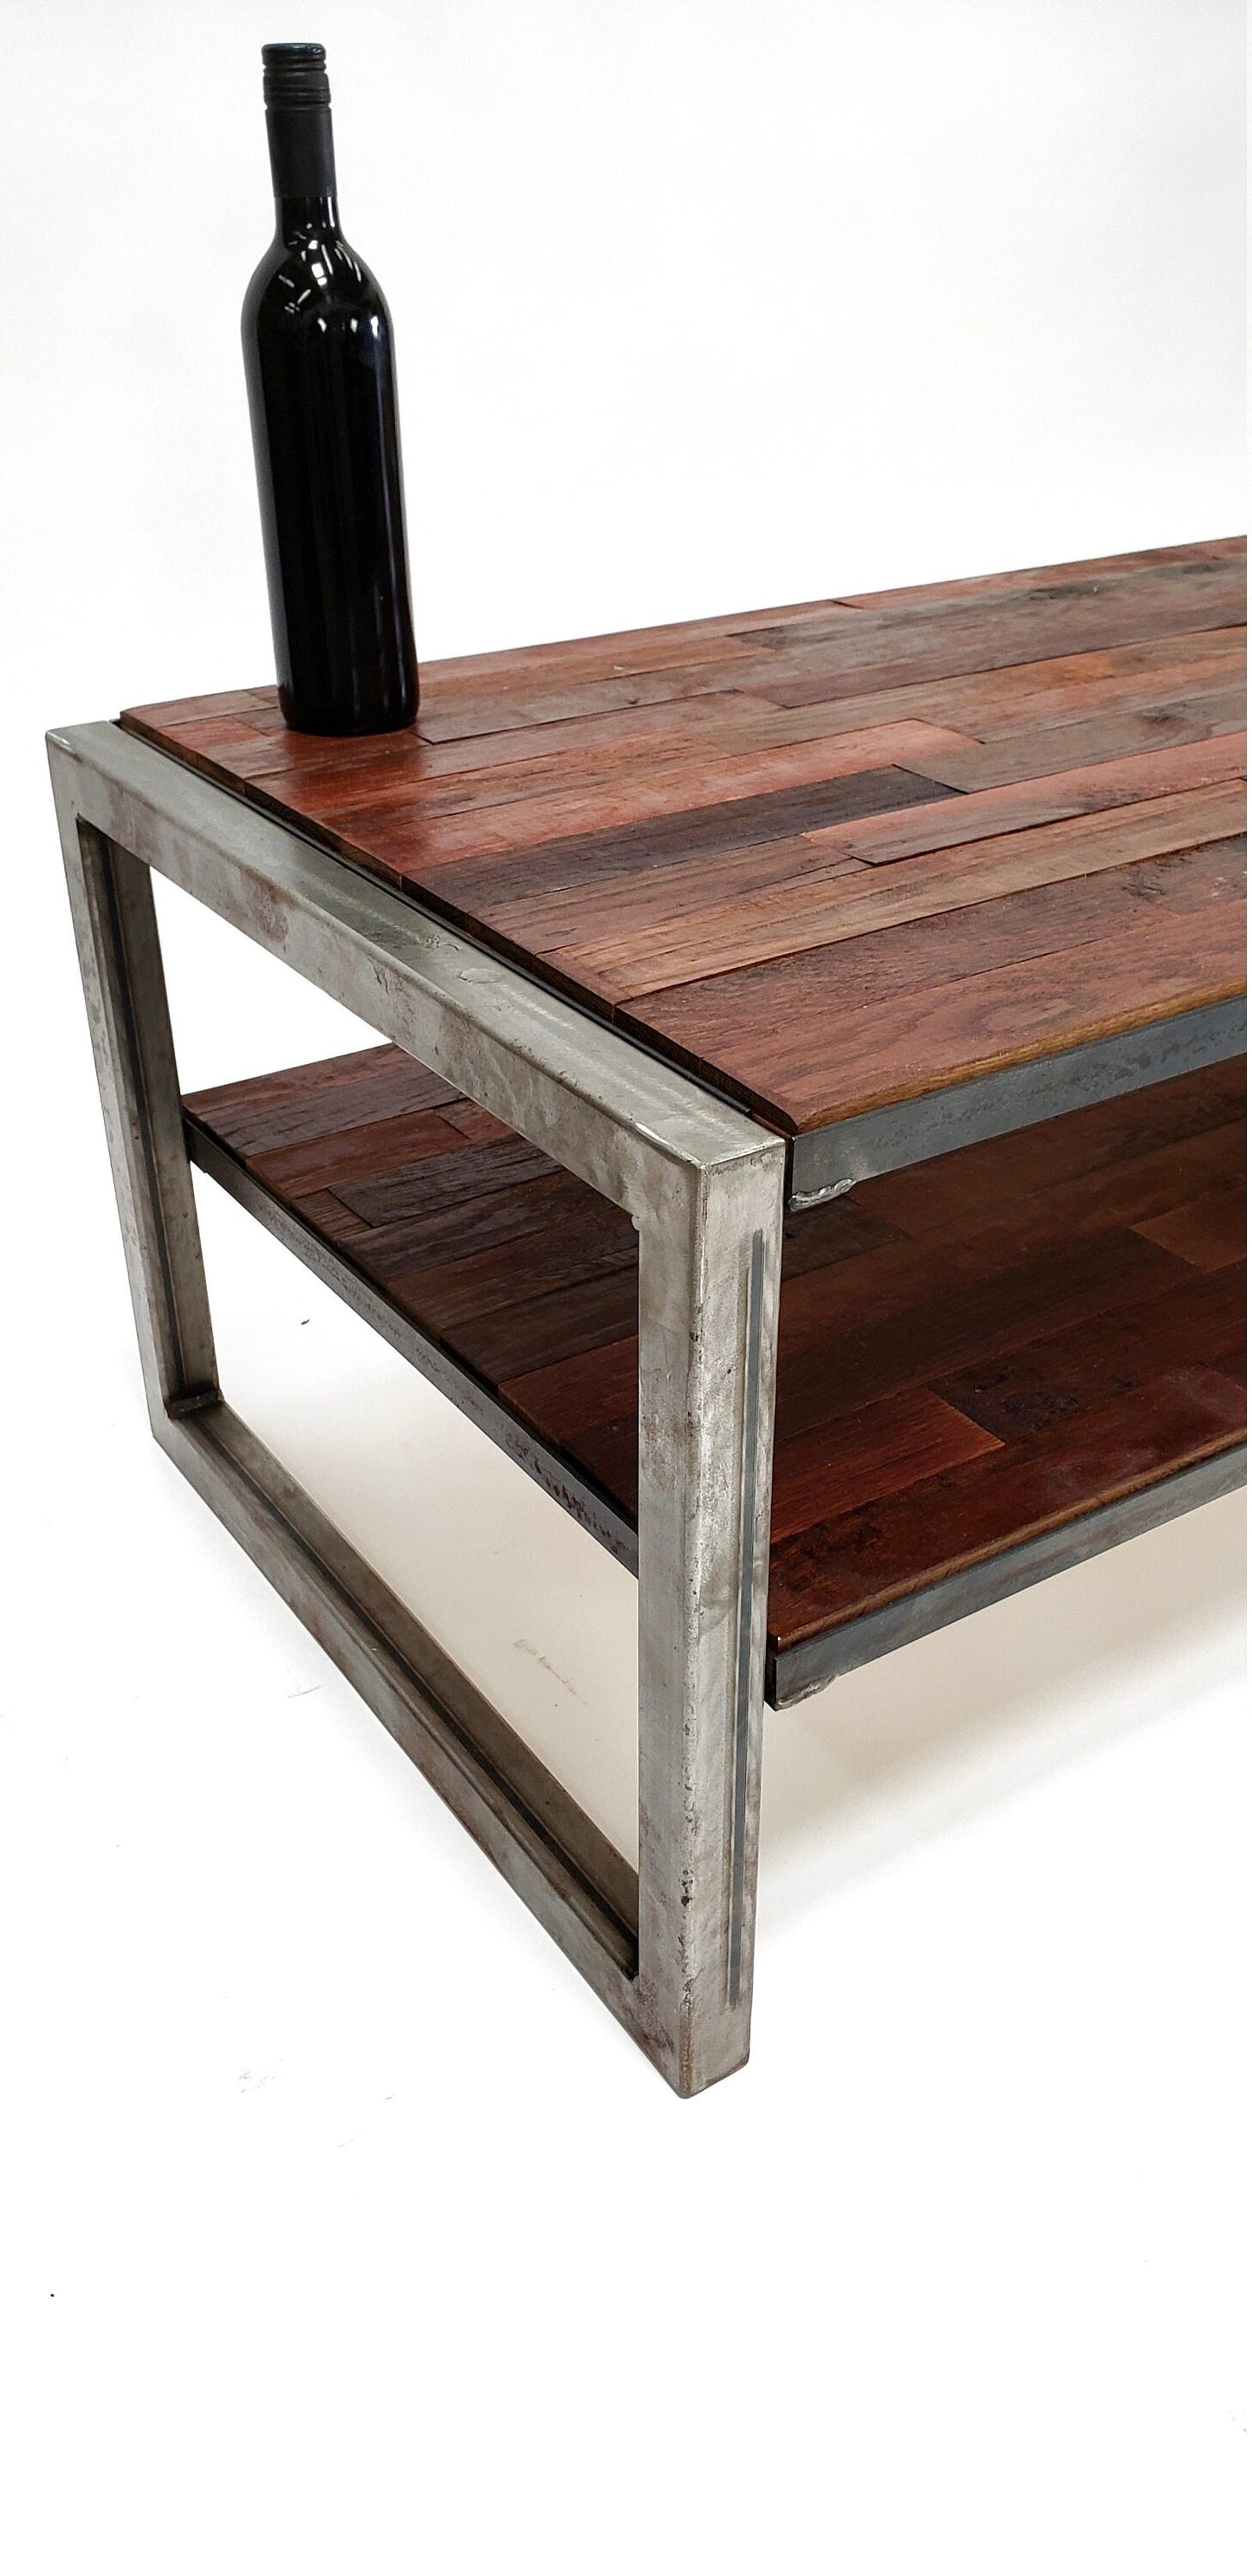 California Wine Barrel and Hand Welded Recycled Steel Coffee Table - Kafe - Cask Oak Side Table. 100% Recycled!